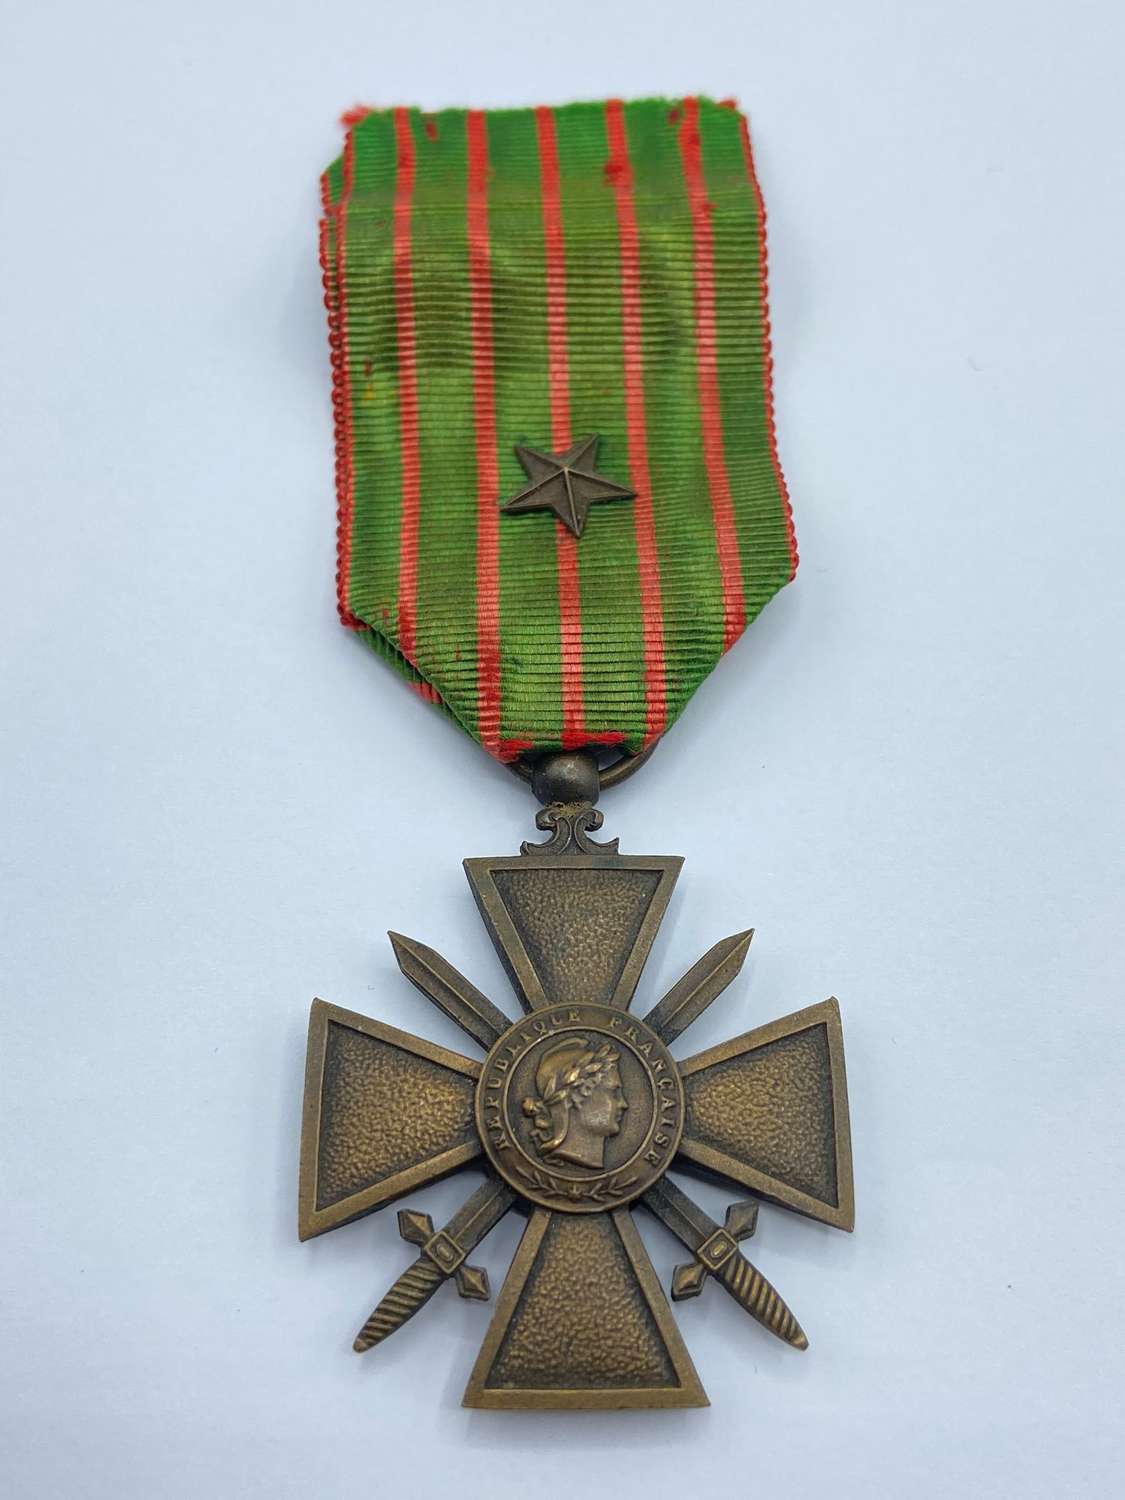 WW1 French Croix de Guerre Cross Of War Medal With Star Citation